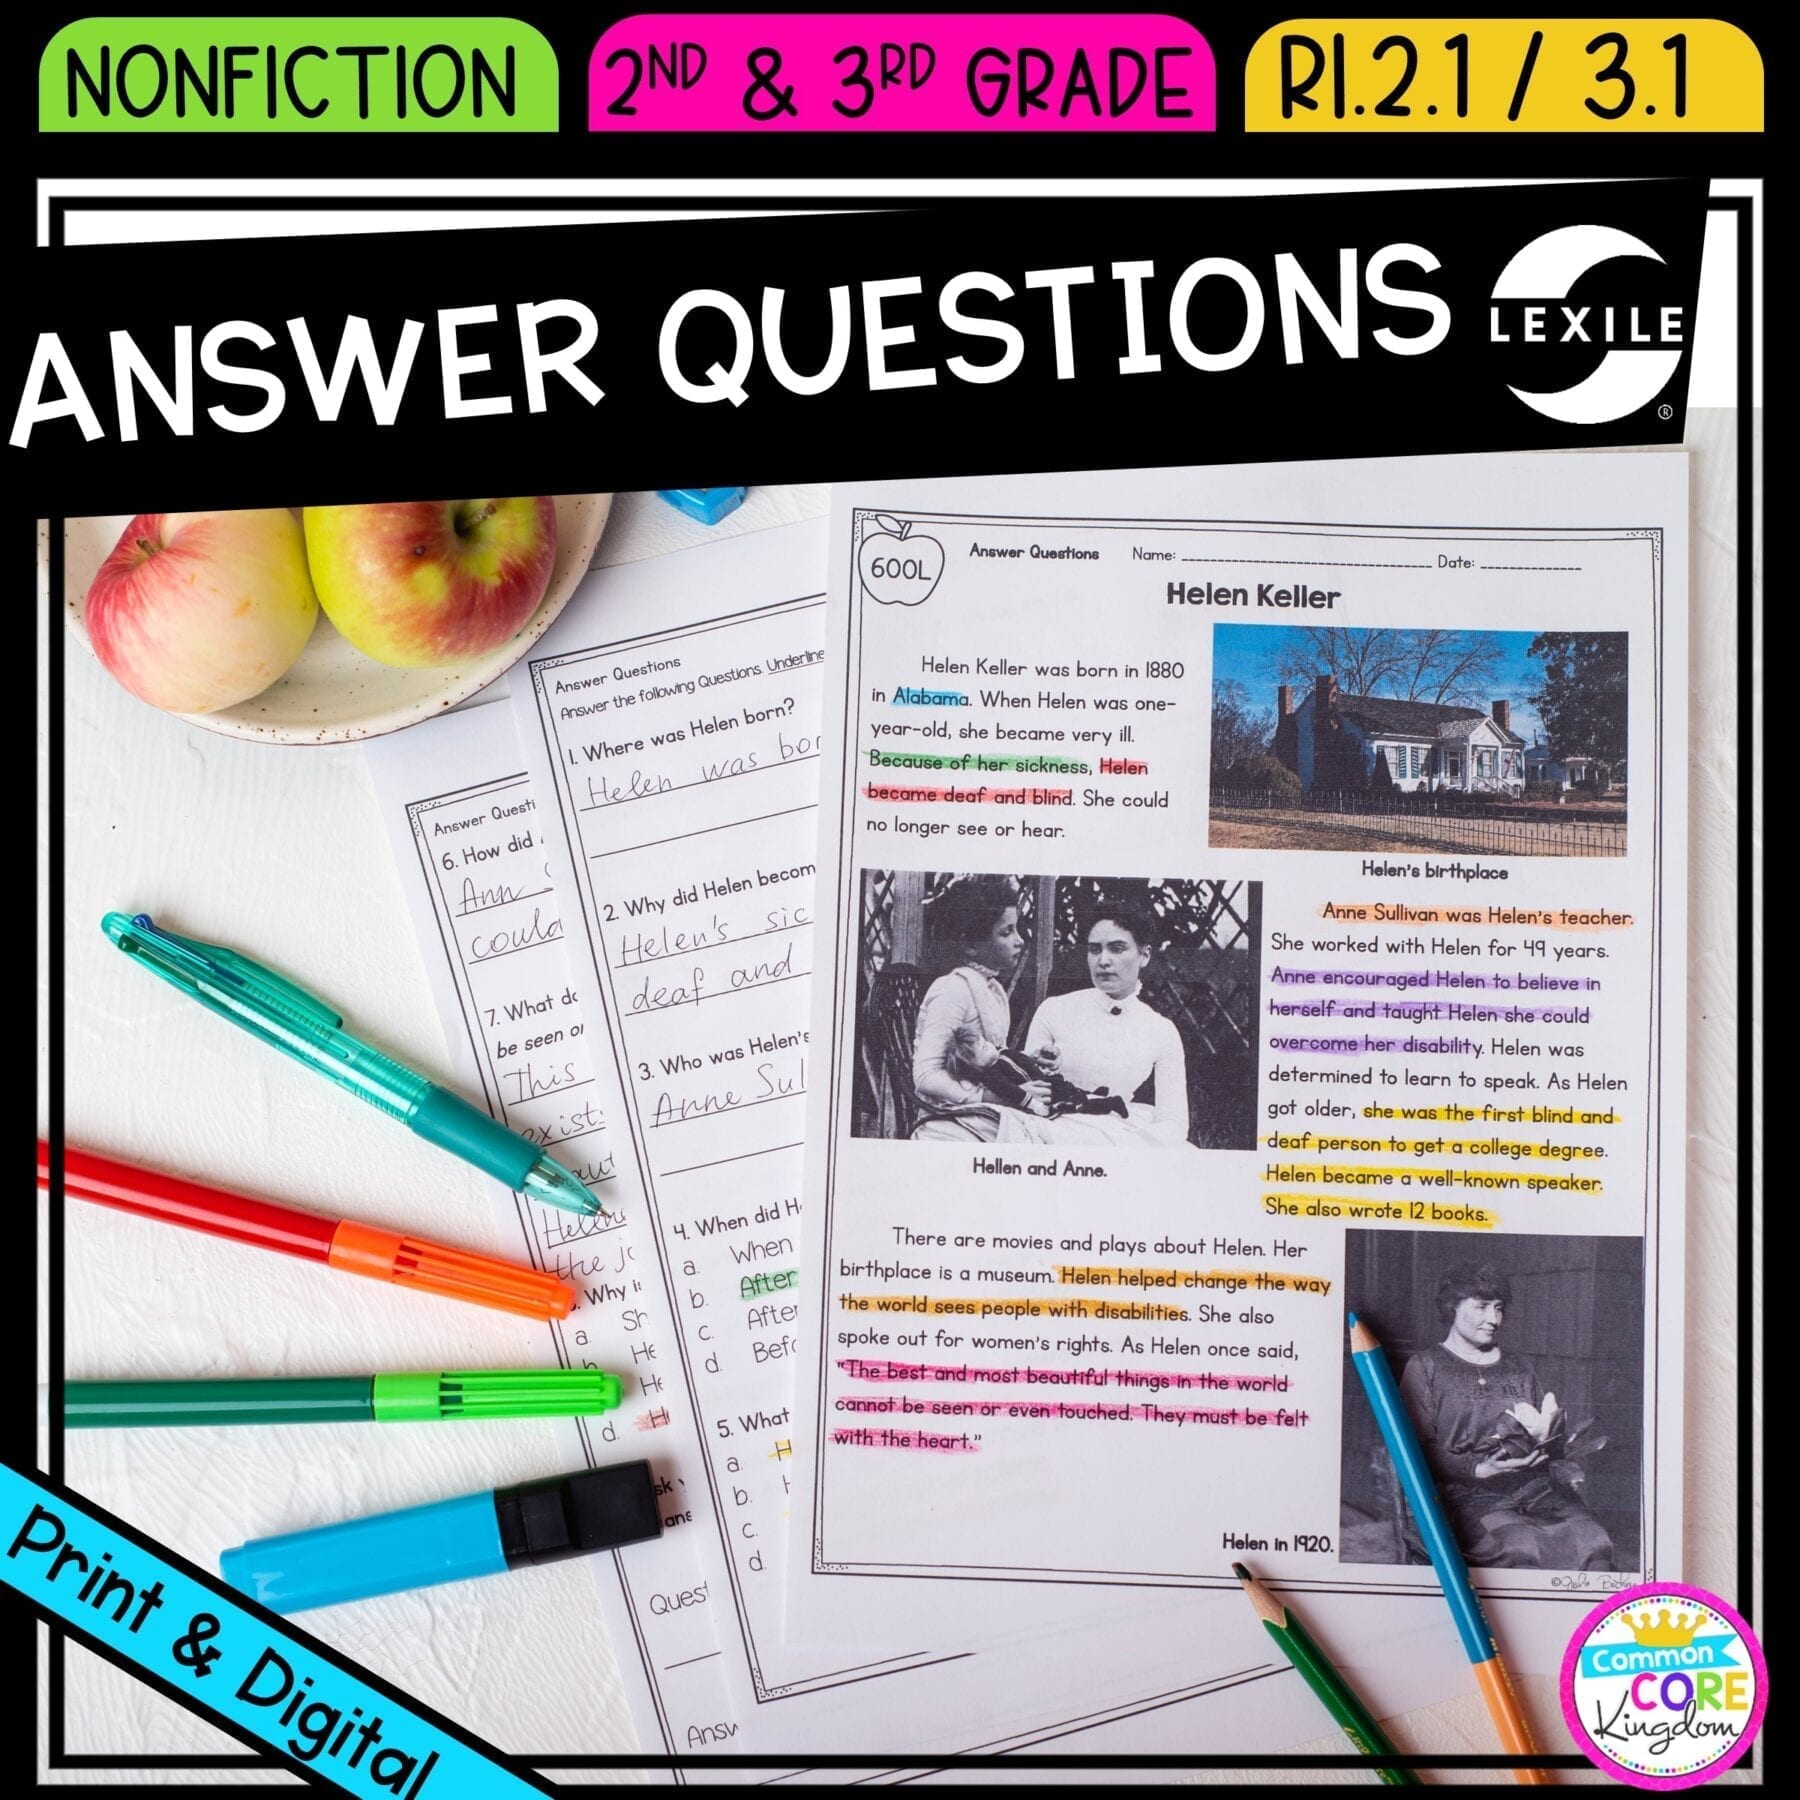 Ask & Answer Questions for 2nd & 3rd grade cover showing printable and digital worksheets